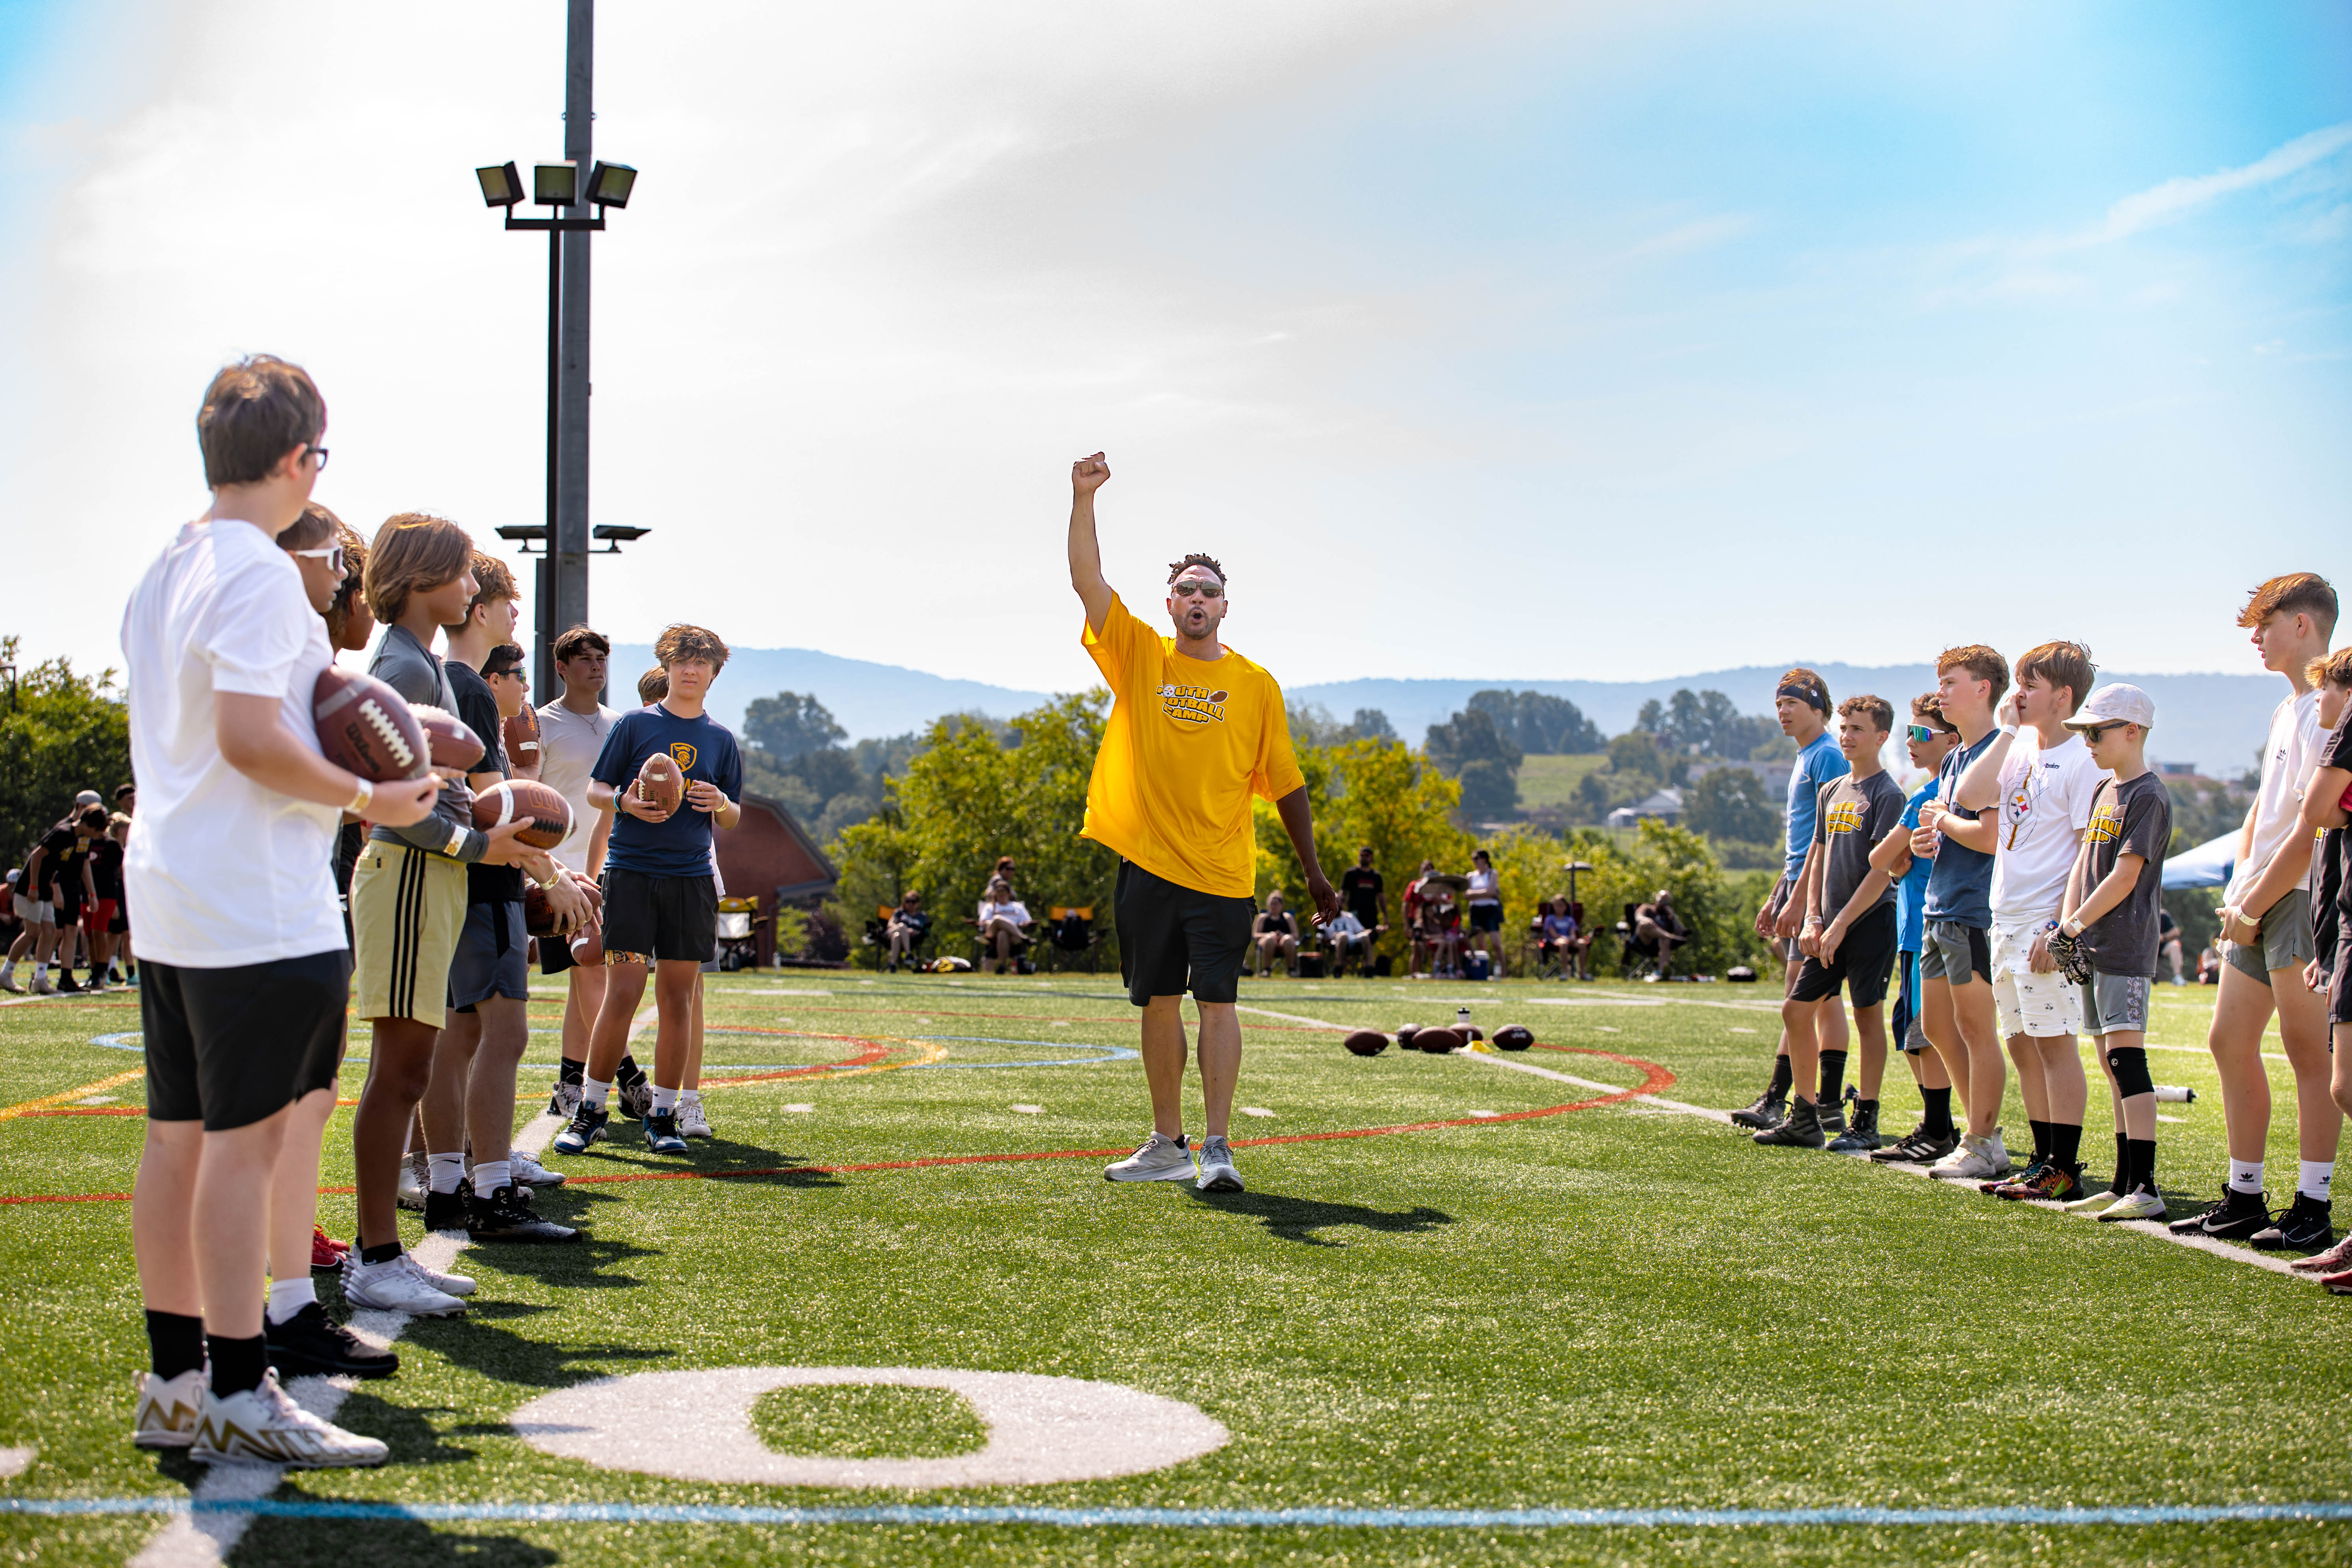 Former Steelers quarterback Charlie Batch leads a passing skills workout